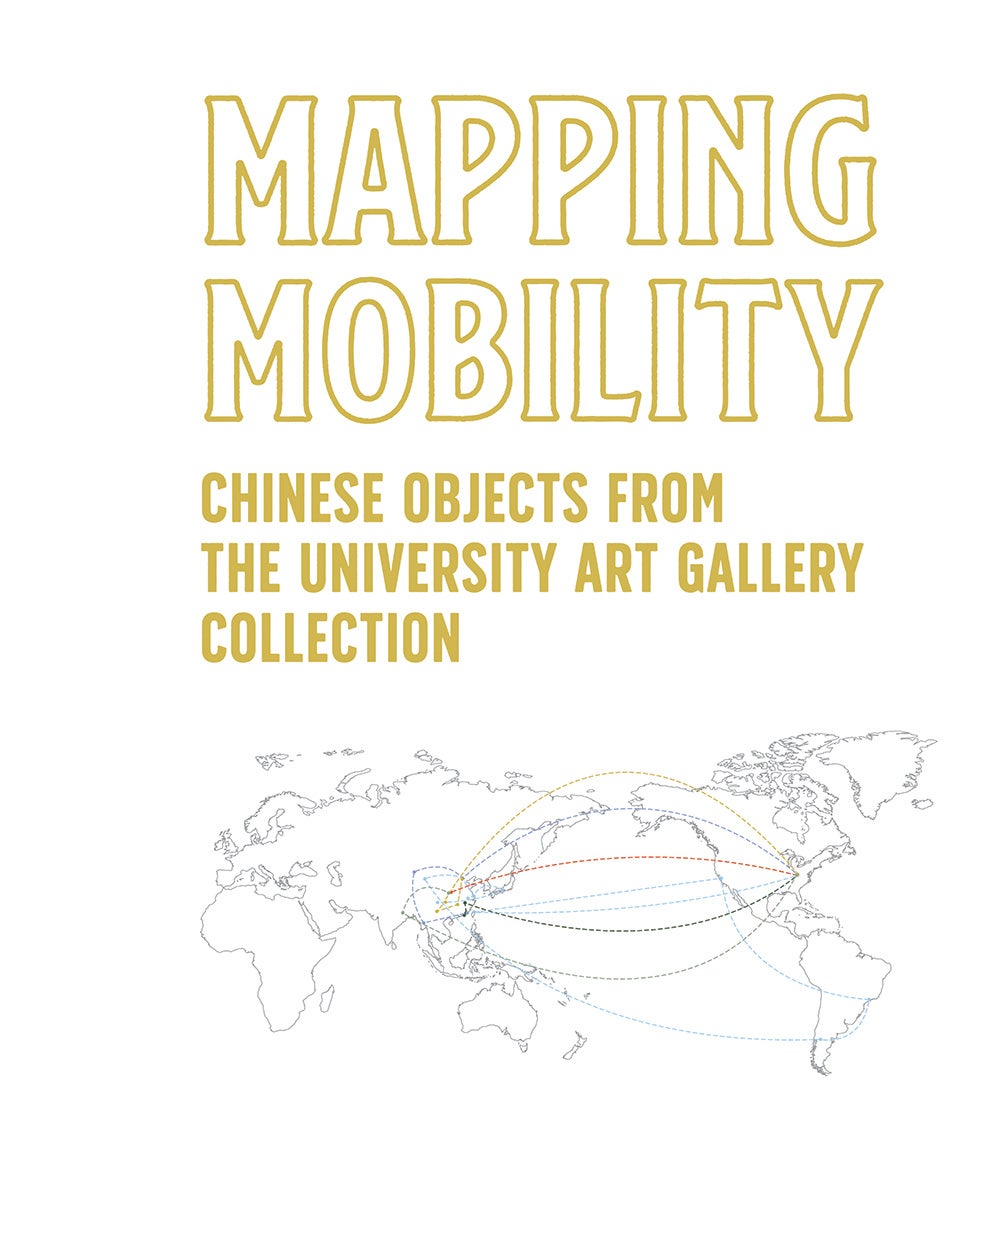 University Art Gallery Exhibition Mapping Mobility: Chinese Works from the Collection of the University Art Gallery